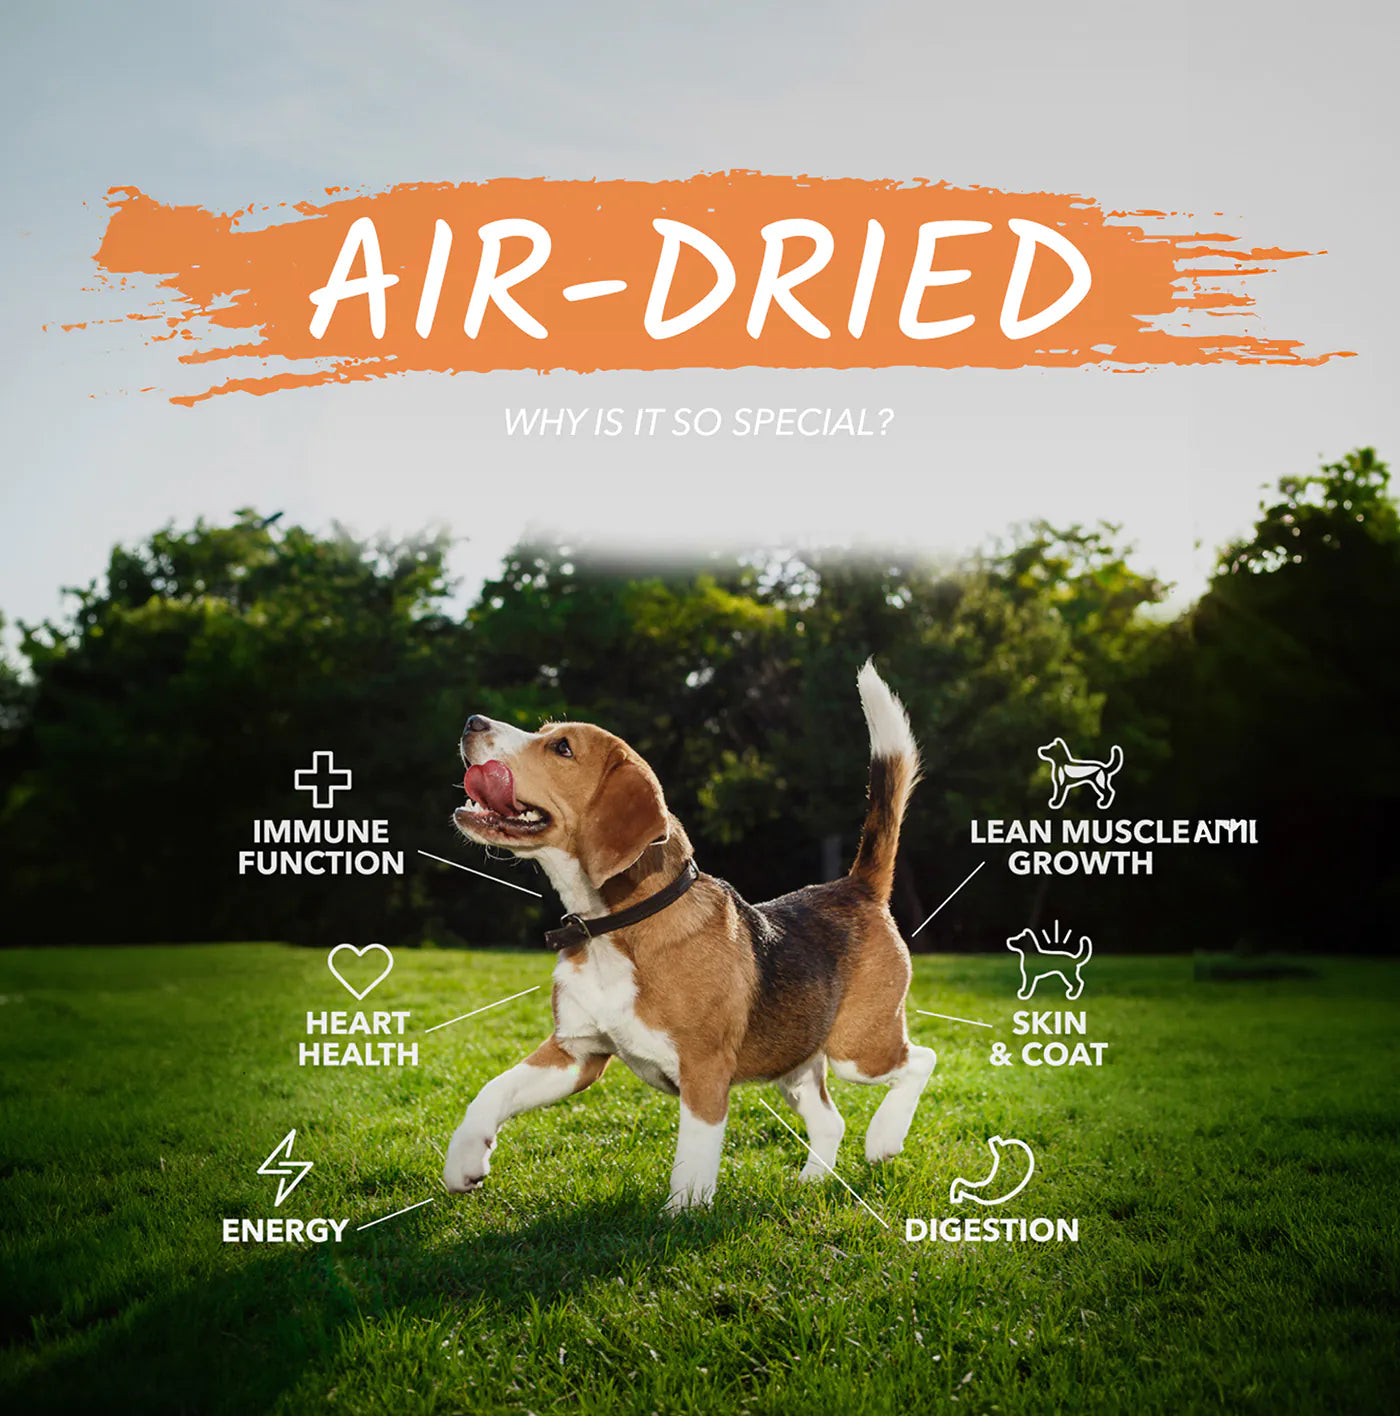 Air Dried - Why is it so special? - Immune Function - Heart Health - Energy - Lean Muscle Growth - Skin &amp; Coat - Digestion